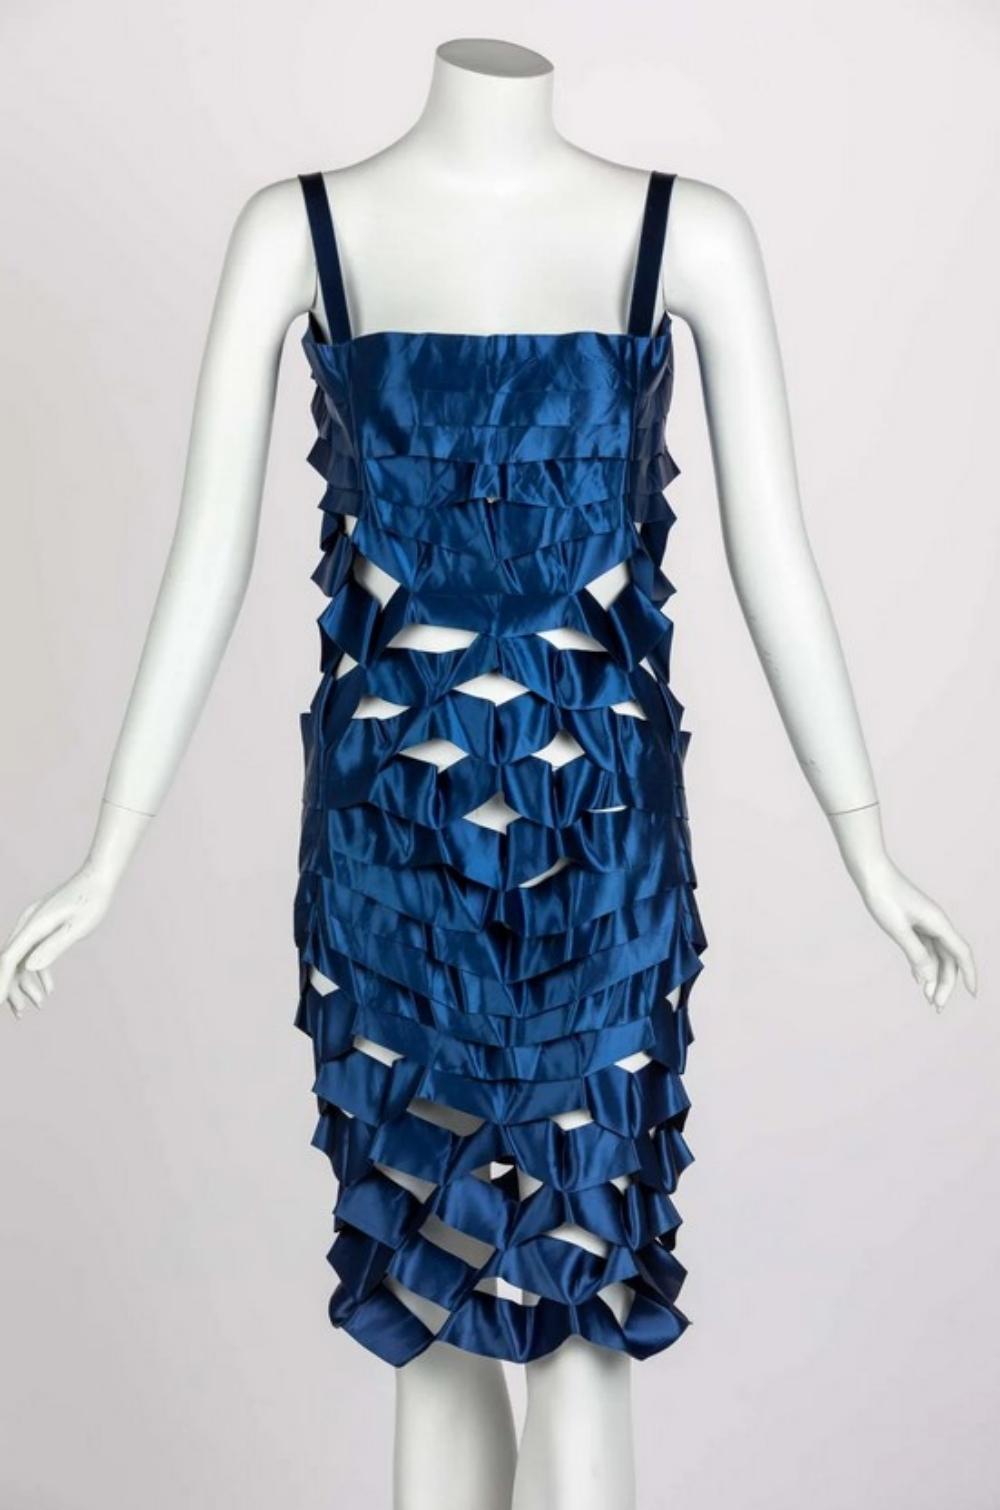 Vintage Issey Miyake Sapphire Japanese Blue Satin Ribbon Cage Dress, 1990s
Drawing inspiration from nature, futuristic Japanese designer Issey Miyake is known for his genius with form and fabric. His interest in perfecting folding techniques comes